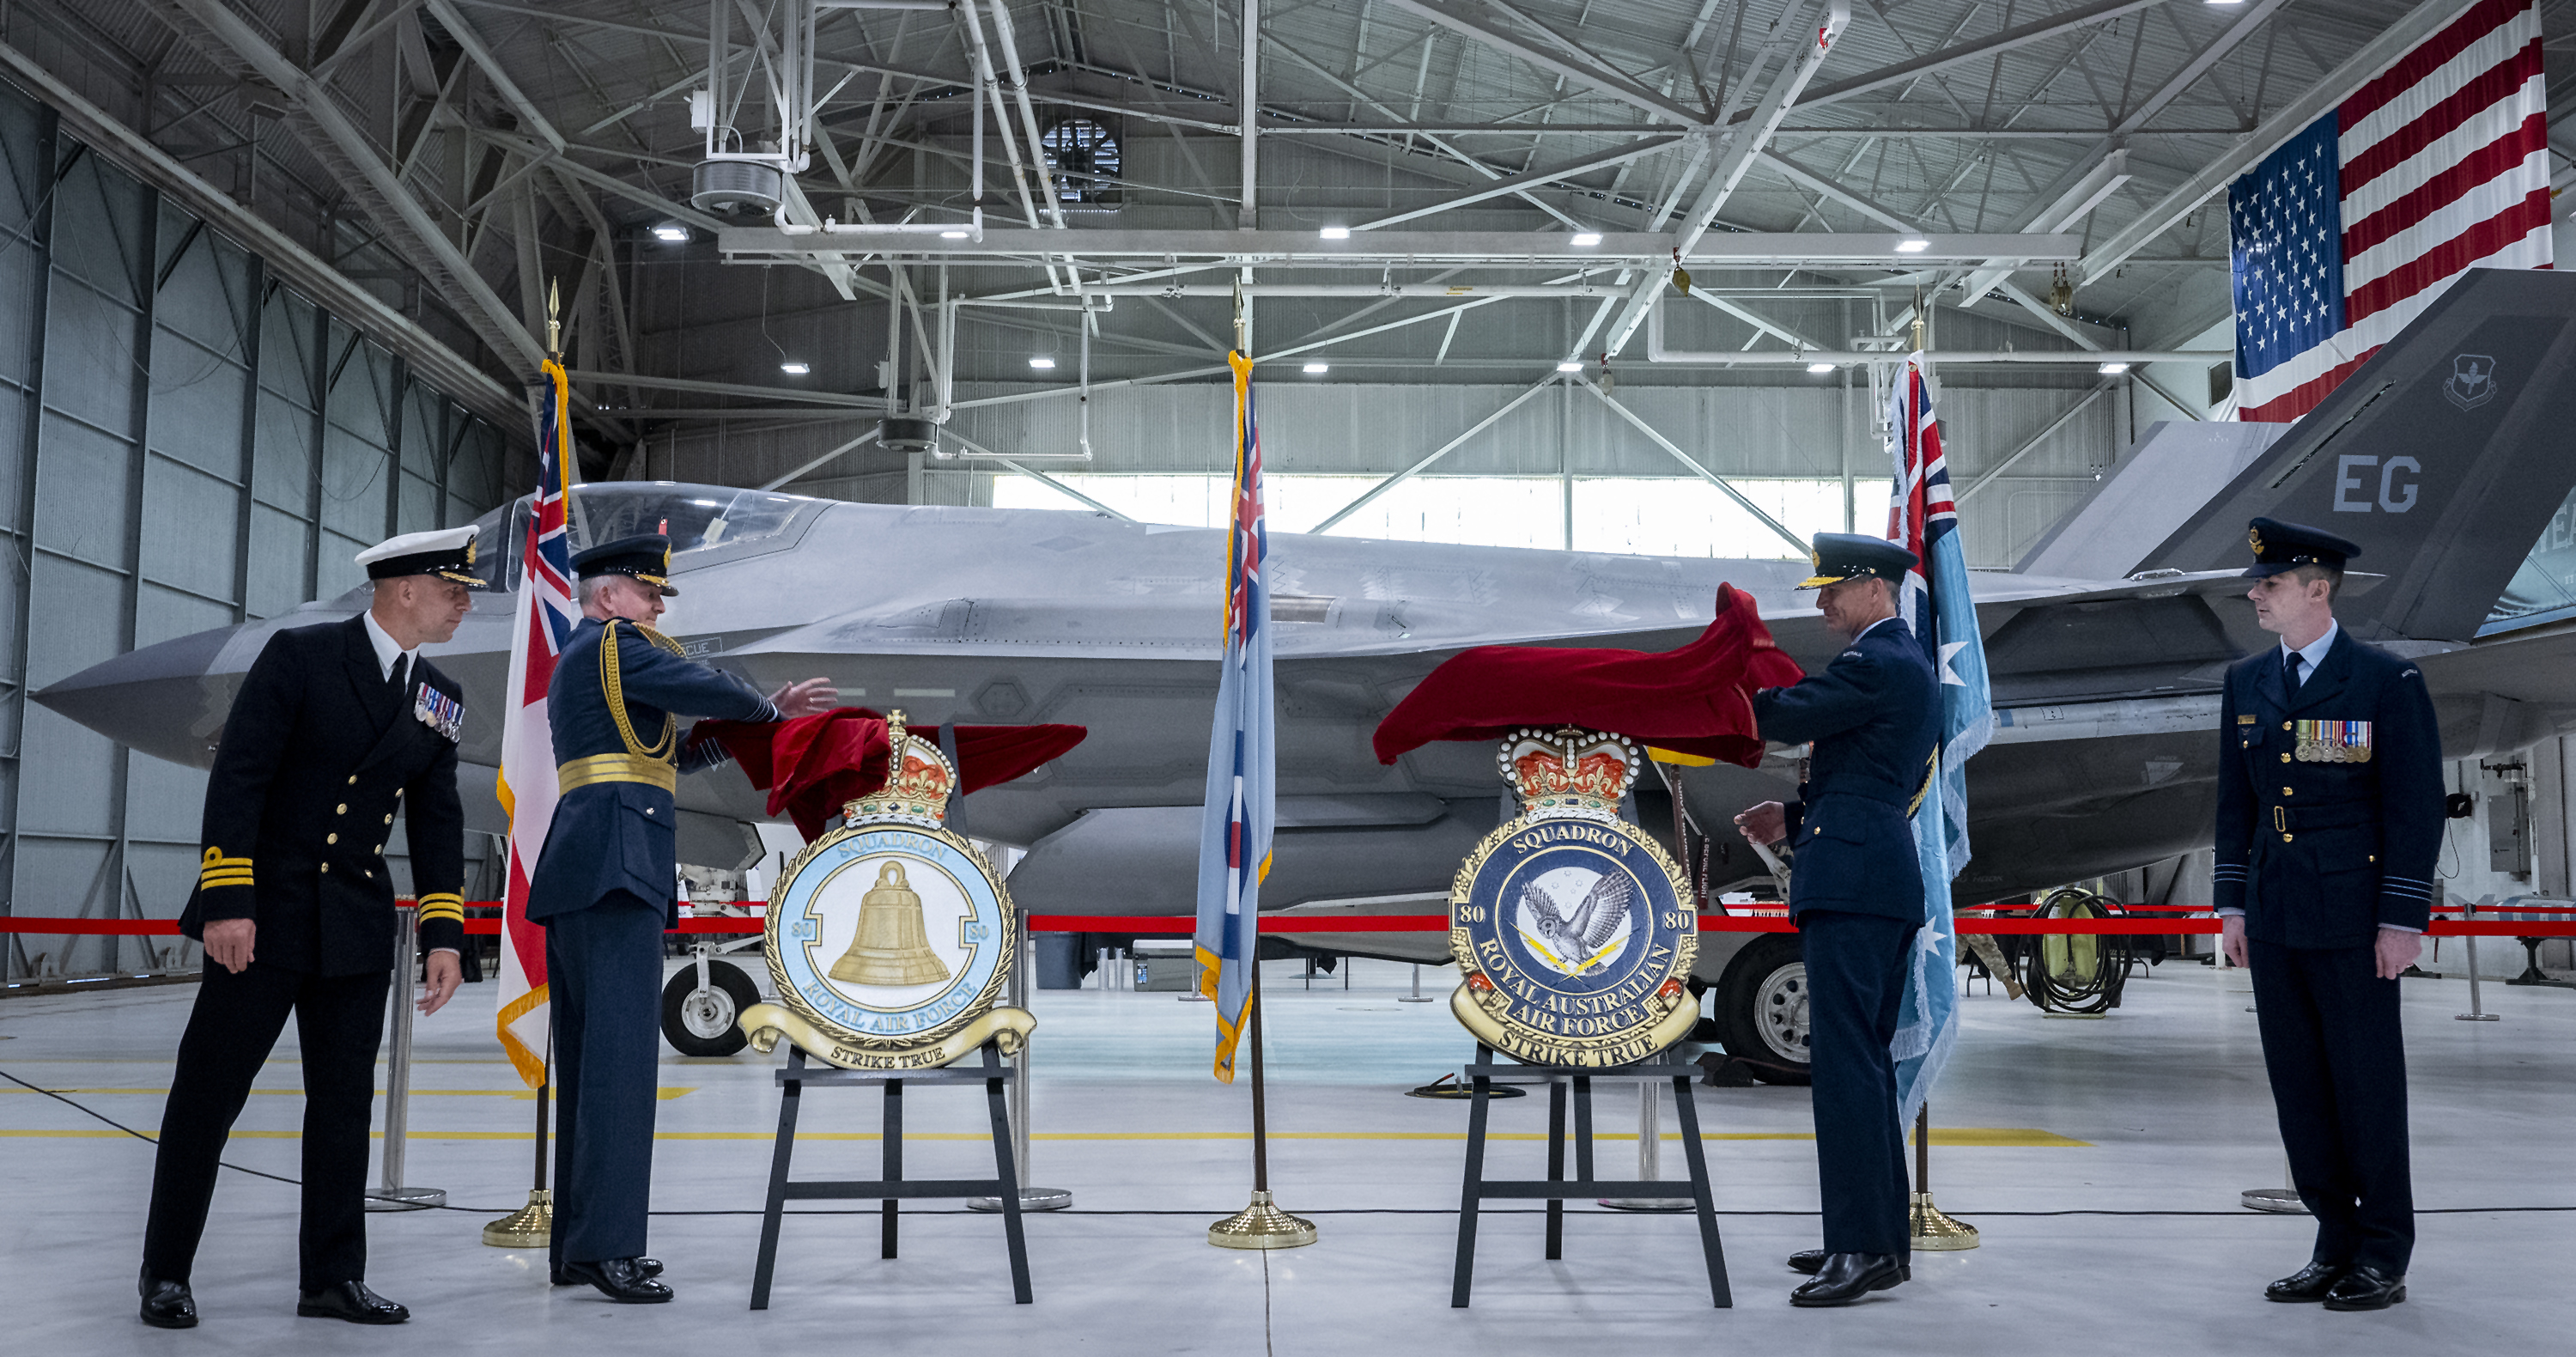 Personnel unveiling the new squadron badges.